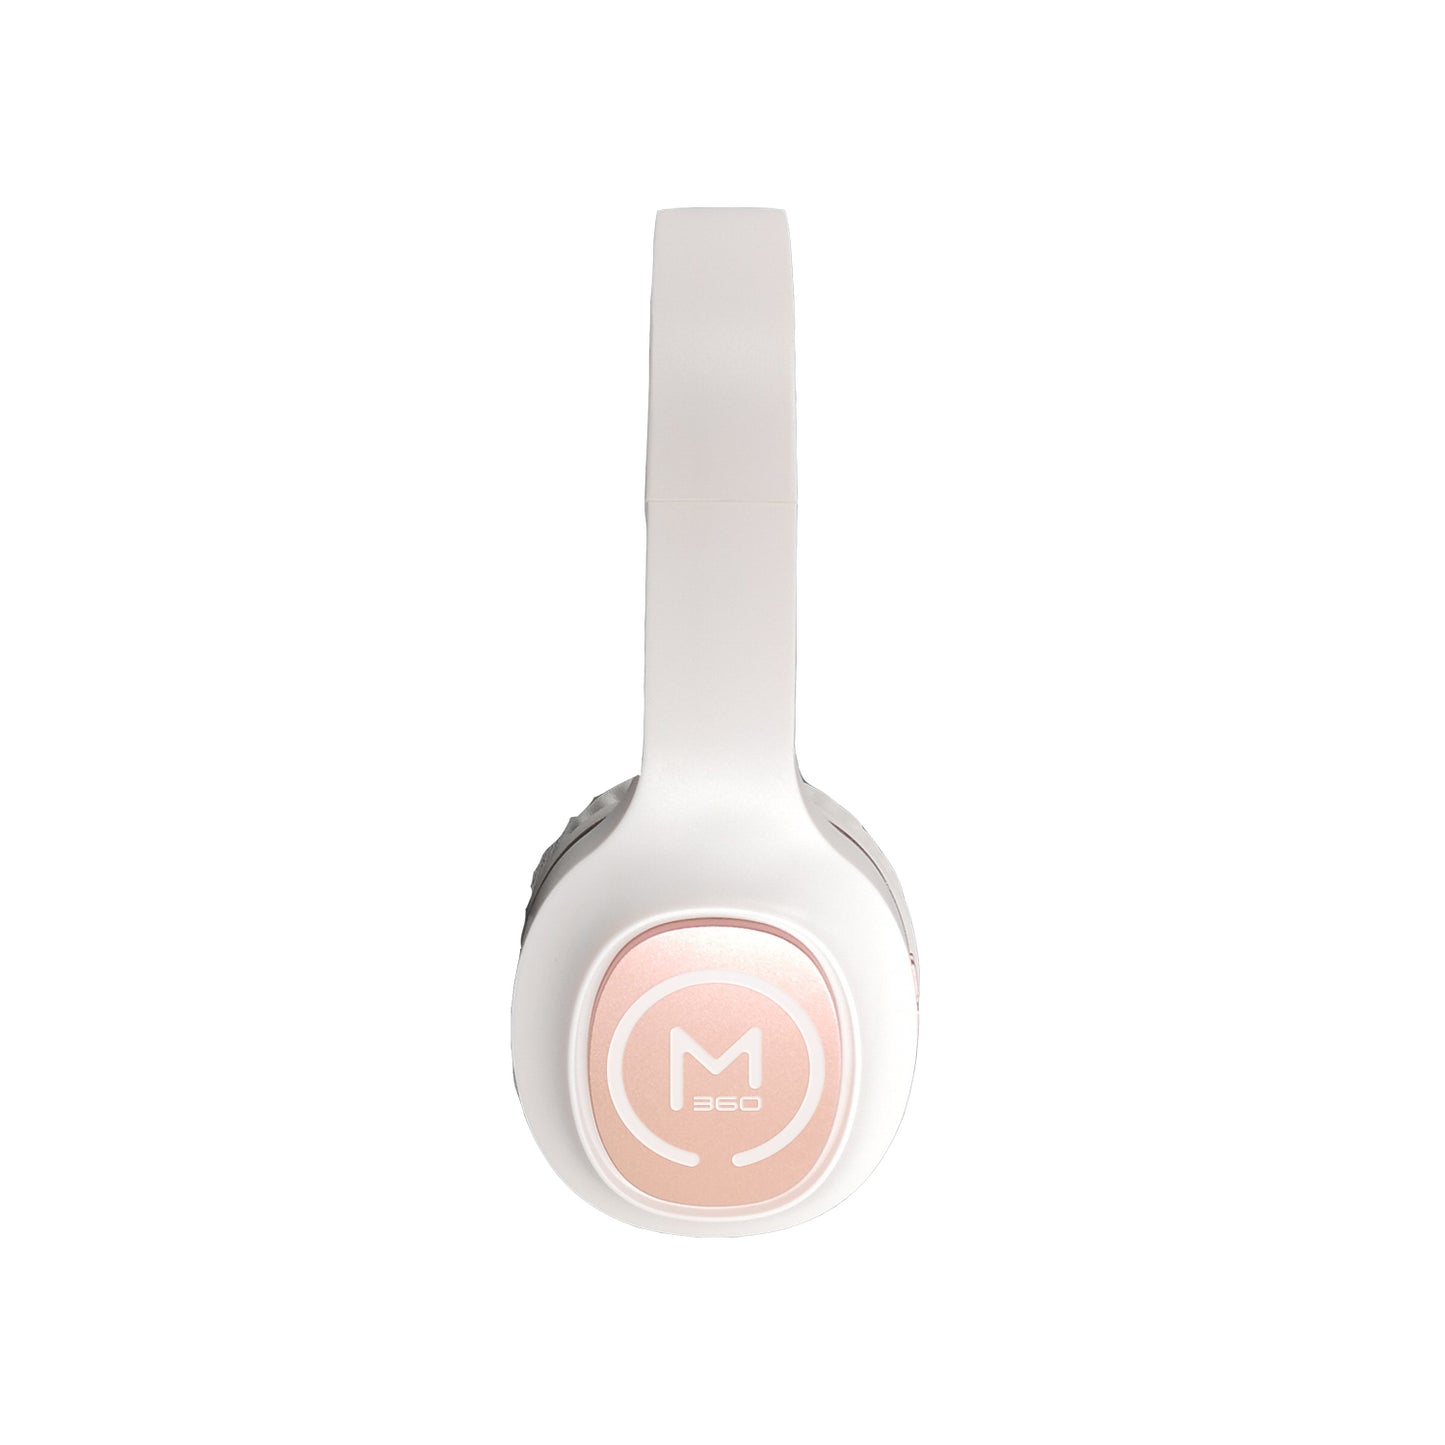 Photo of Morpheus 360 Tremors Wireless on-ear Headphones – White with Rose Gold accents, side view.